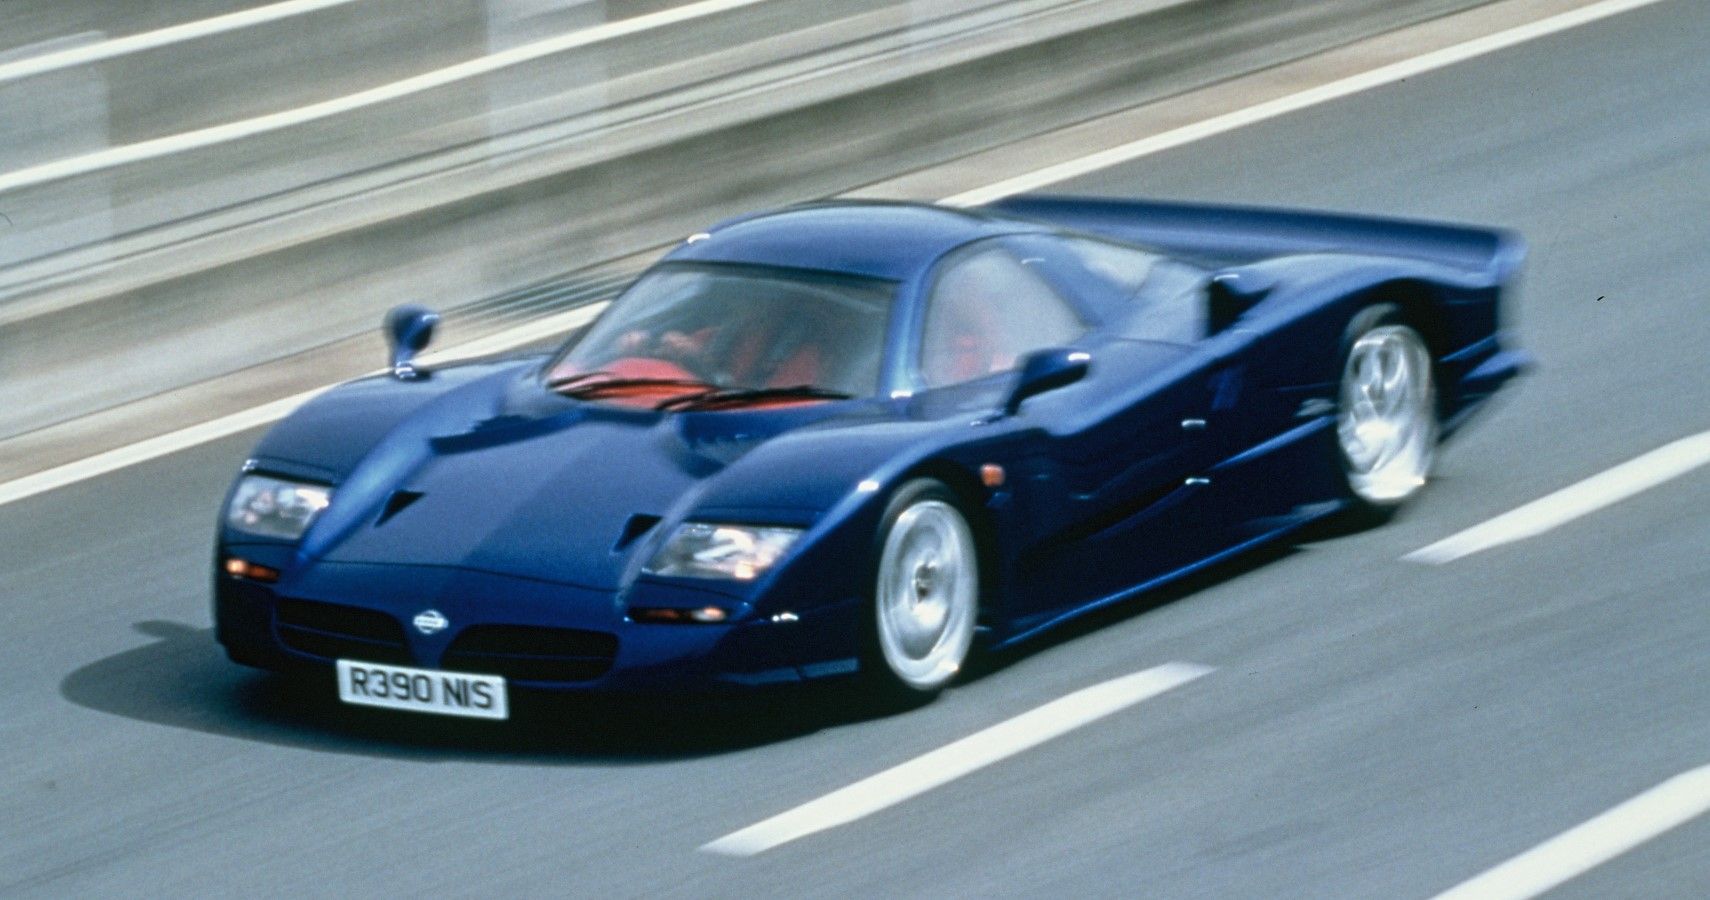 Nissan R390 GT1 accelerating on track front third quarter ariel view